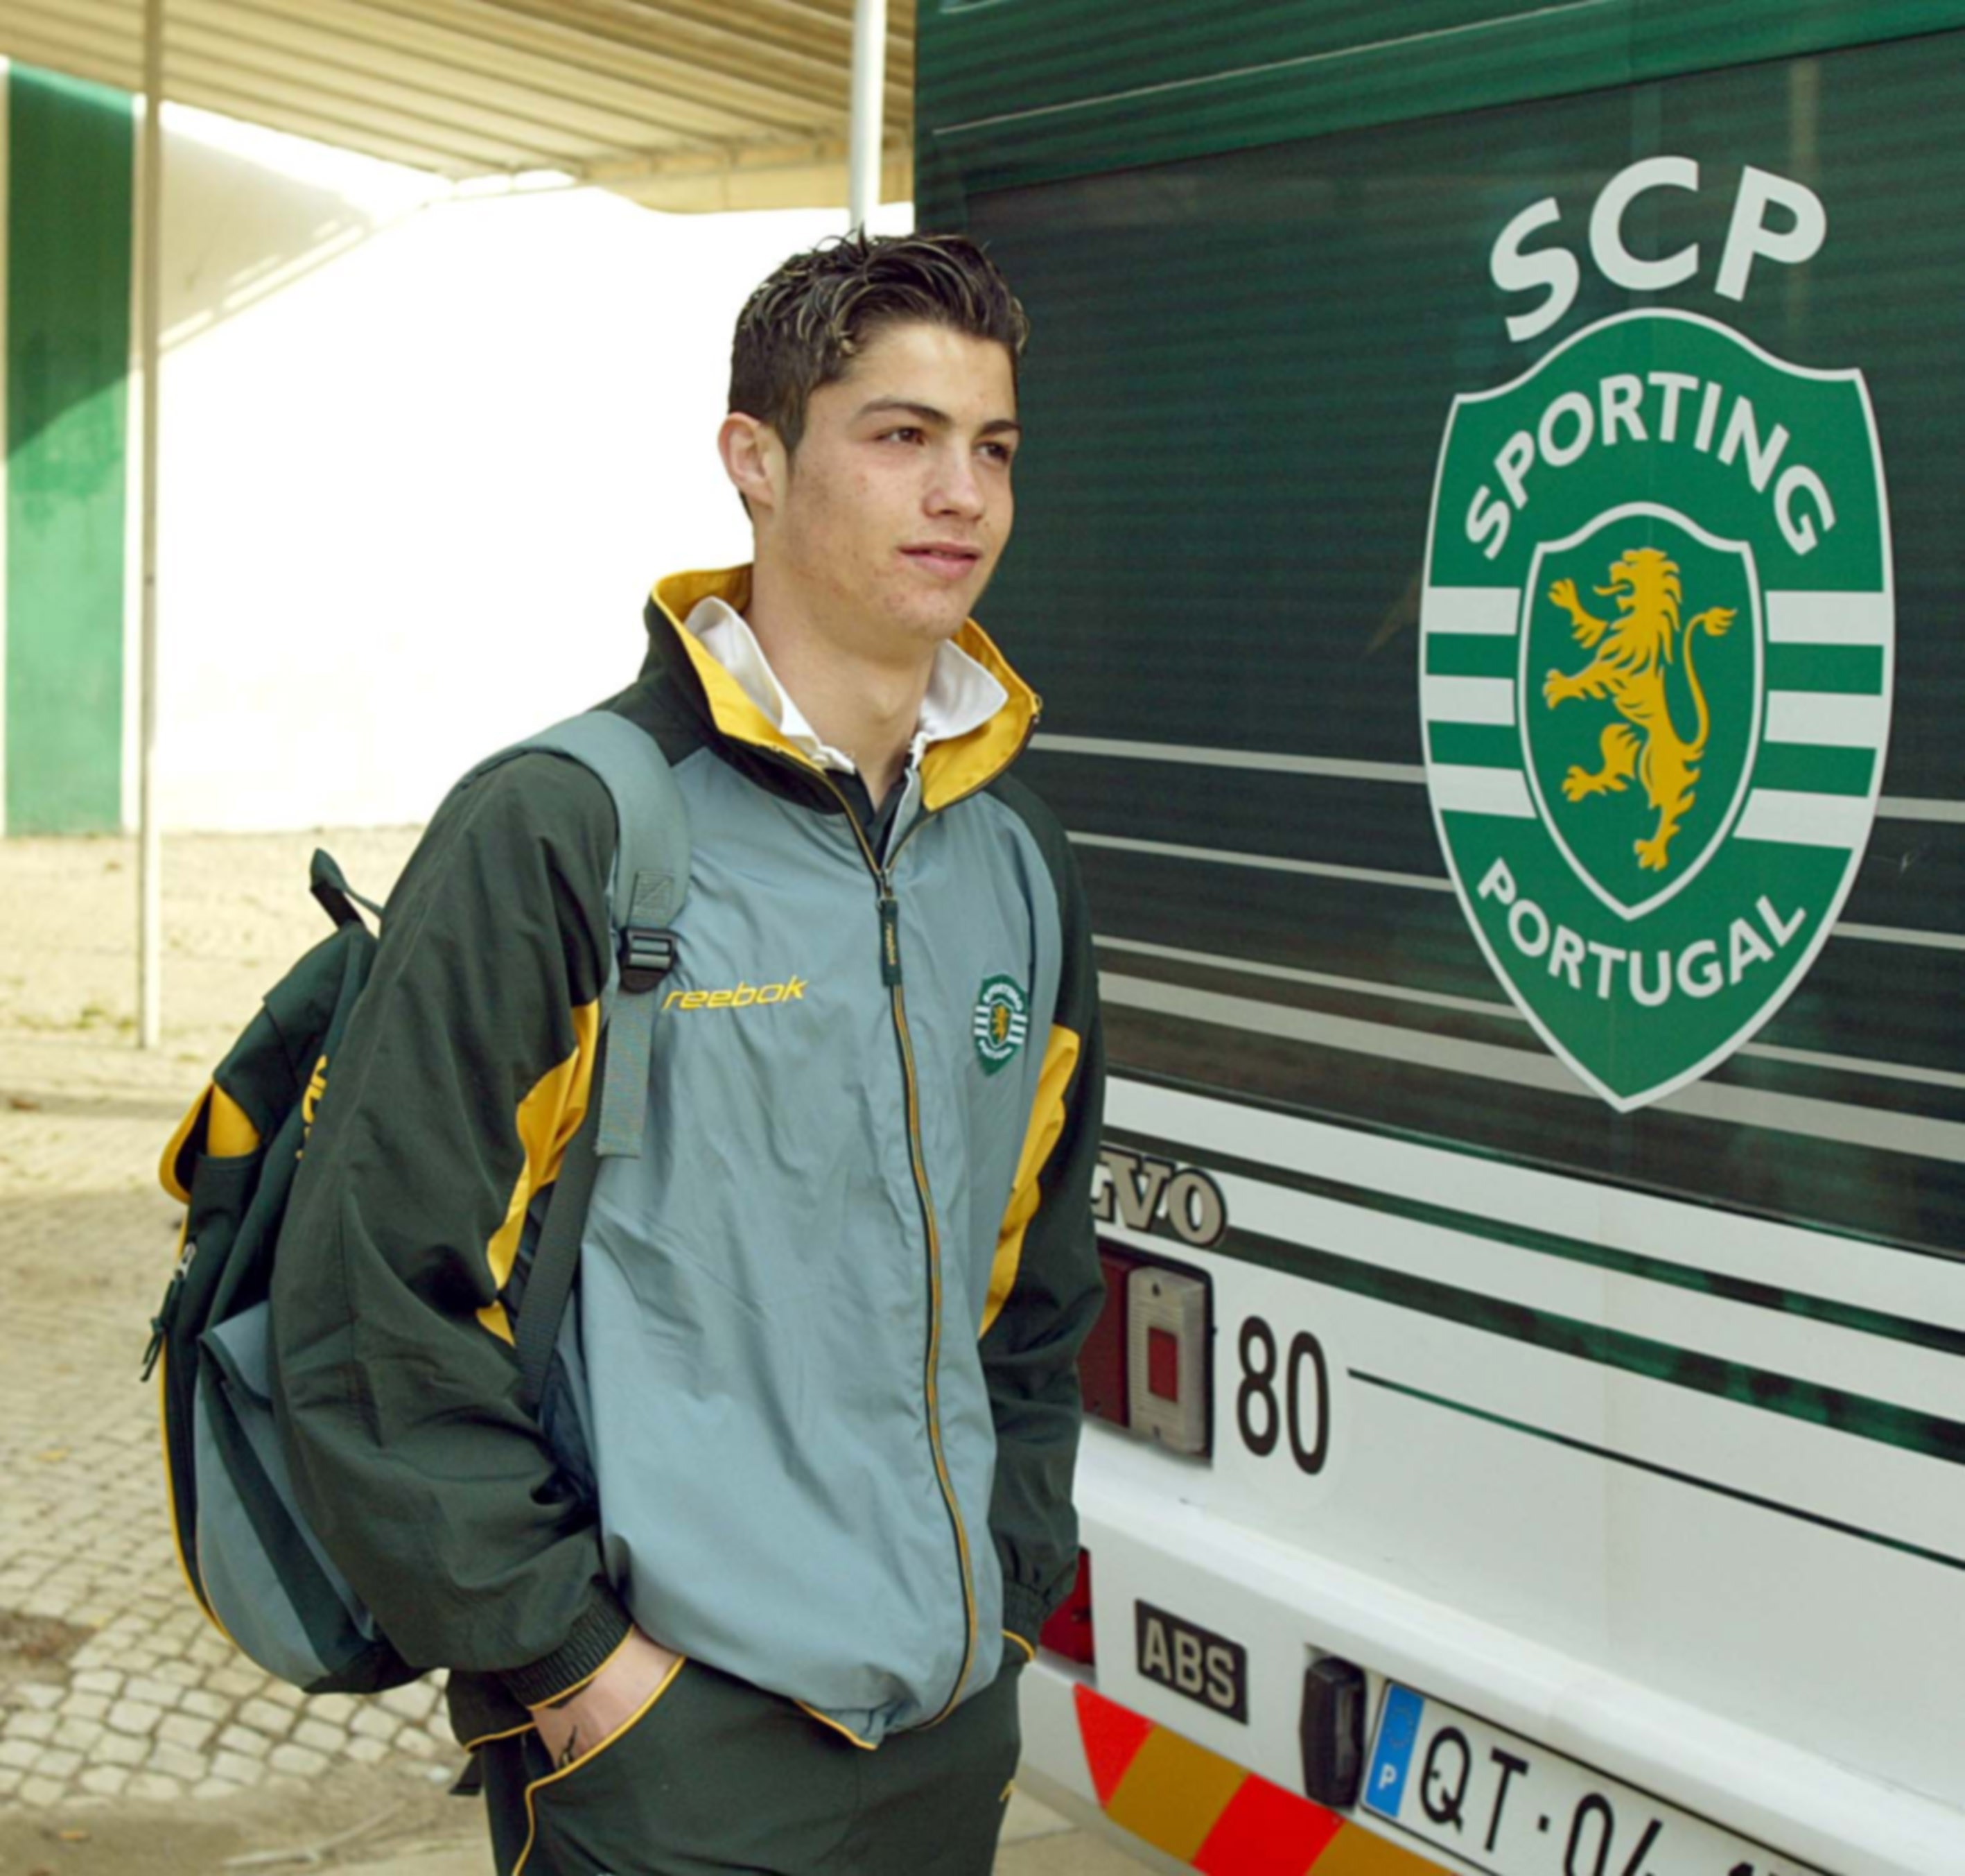 Ronaldo would get upset when he lost even as a youngster in the Sporting academy